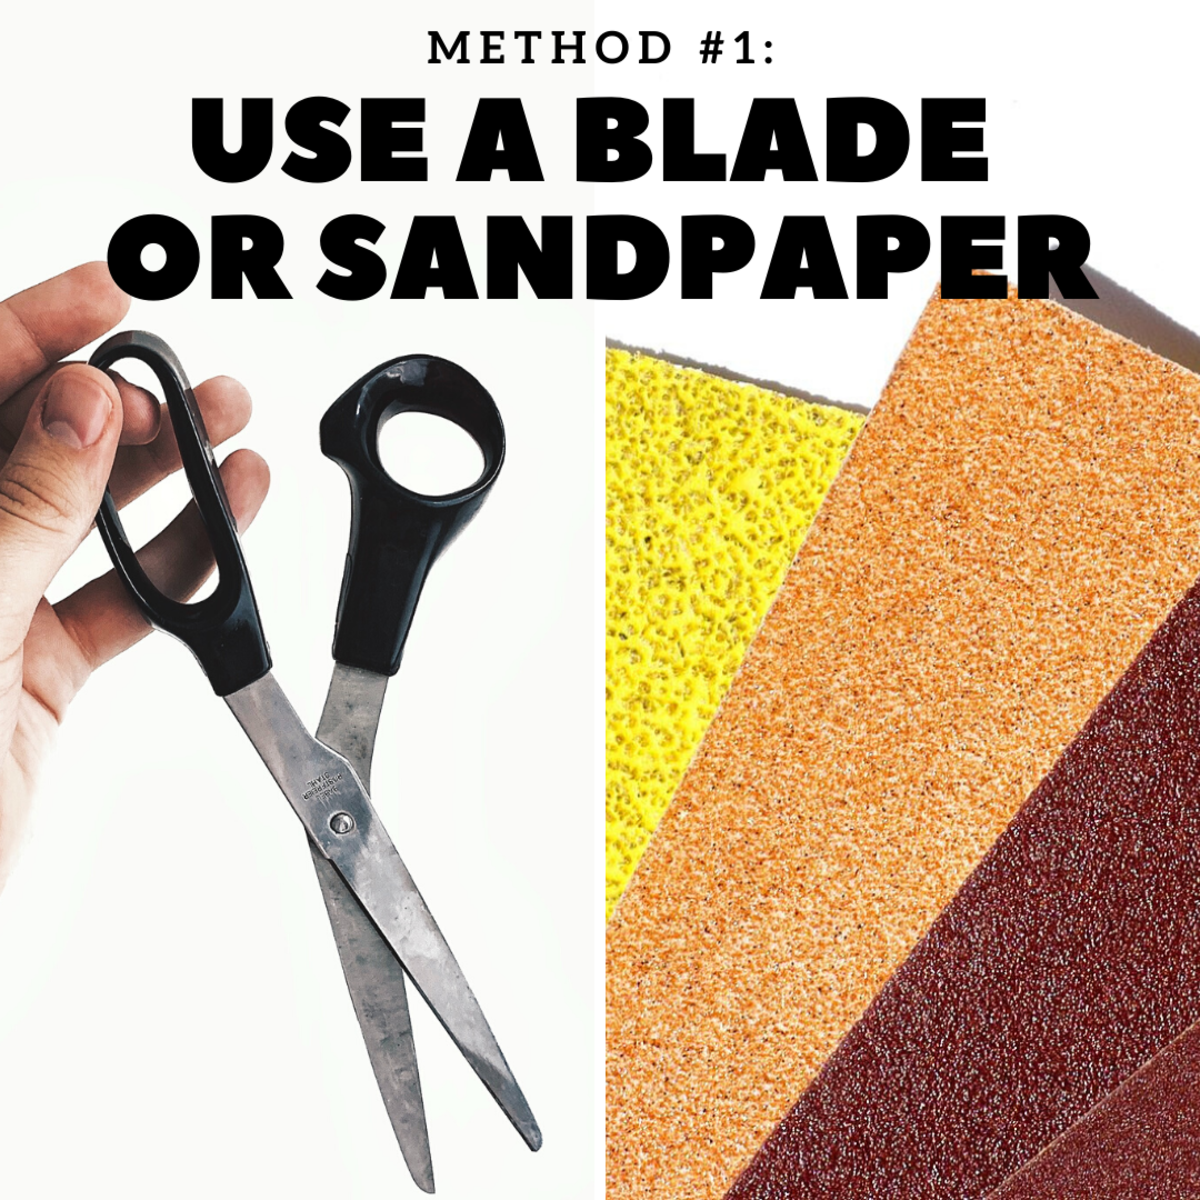 Use a blade or sandpaper!